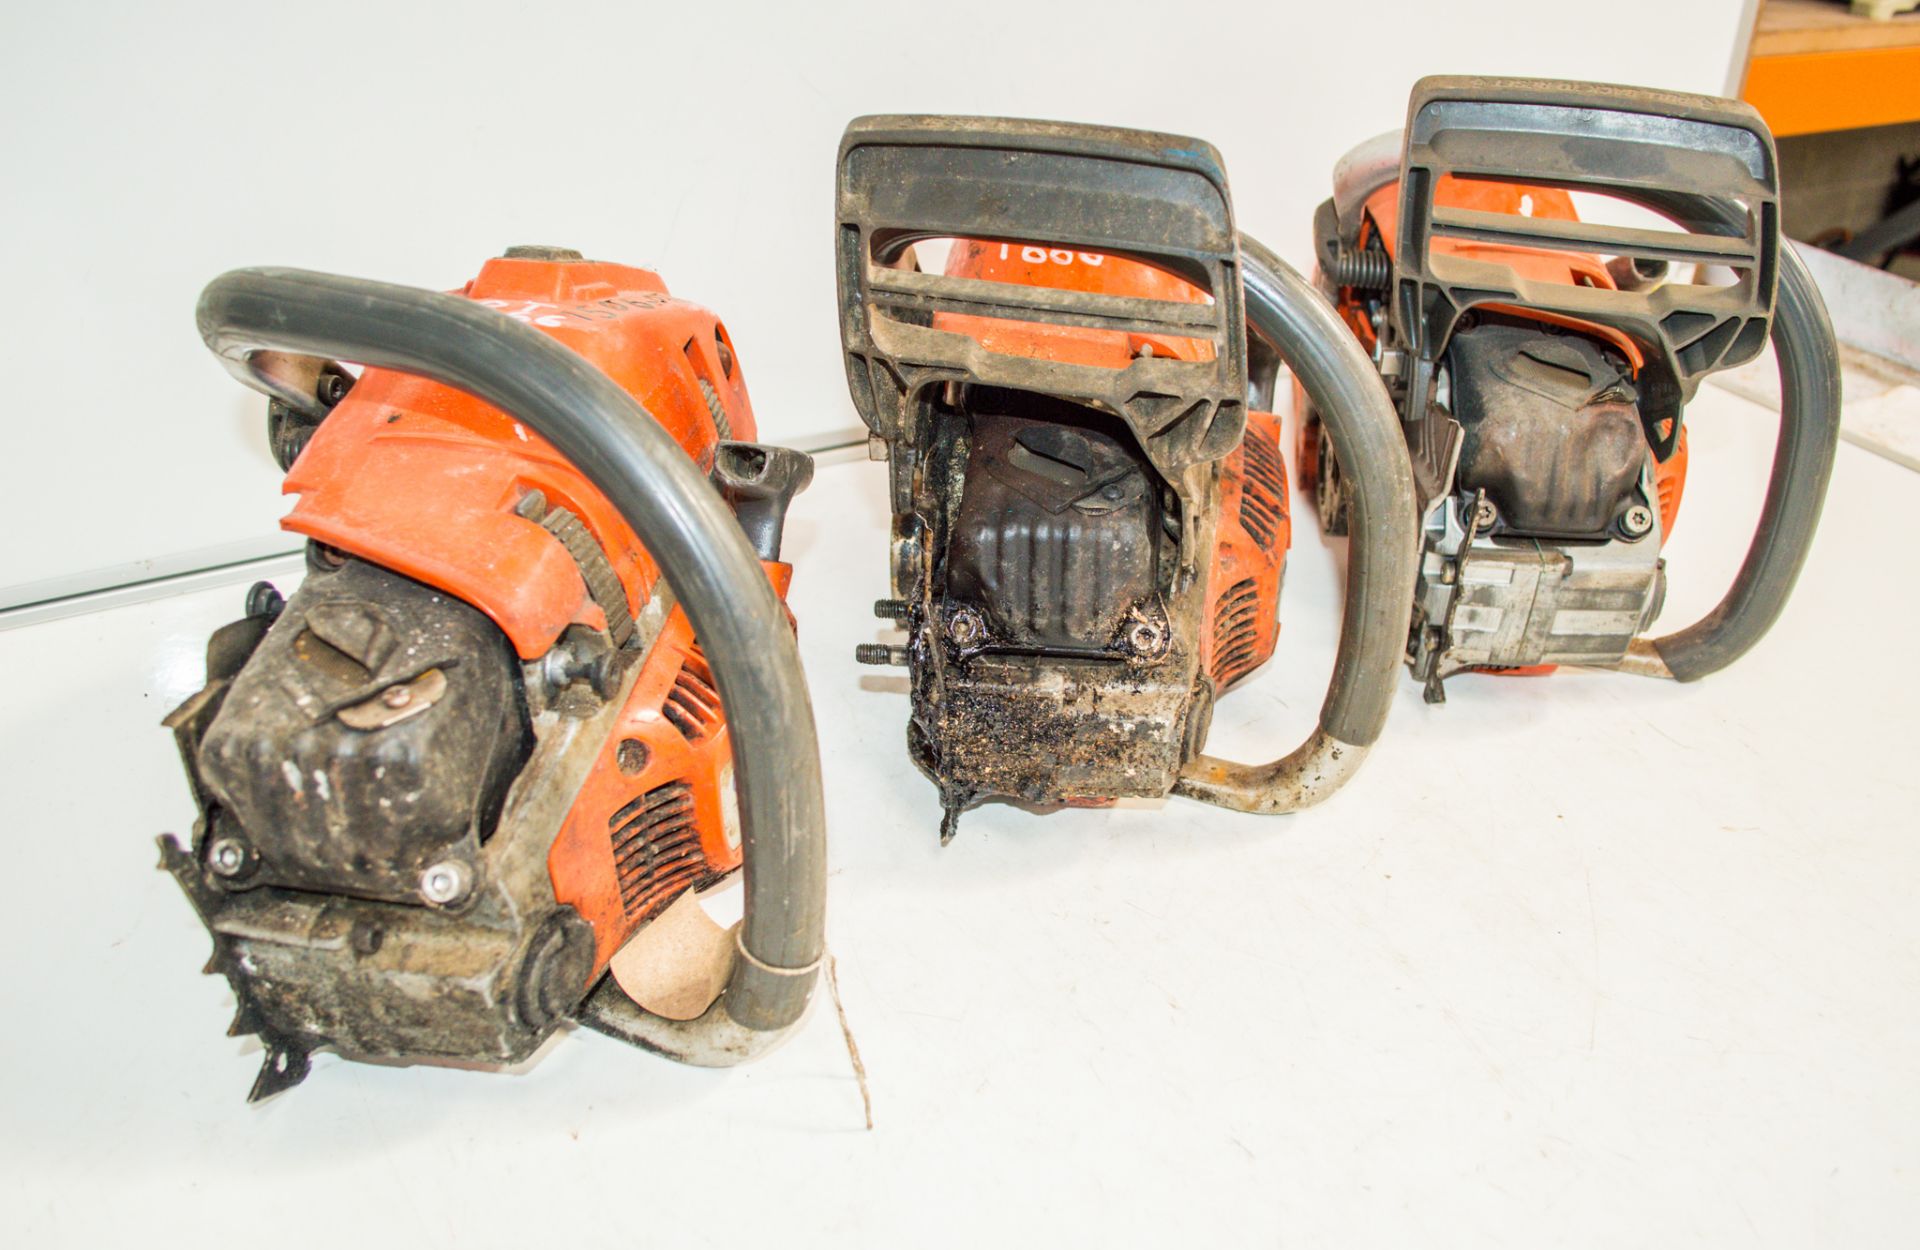 3 - Husqvarna petrol driven chainsaw 15051261/15060716/1903-0153 ** All with no bars or chains ** - Image 2 of 2